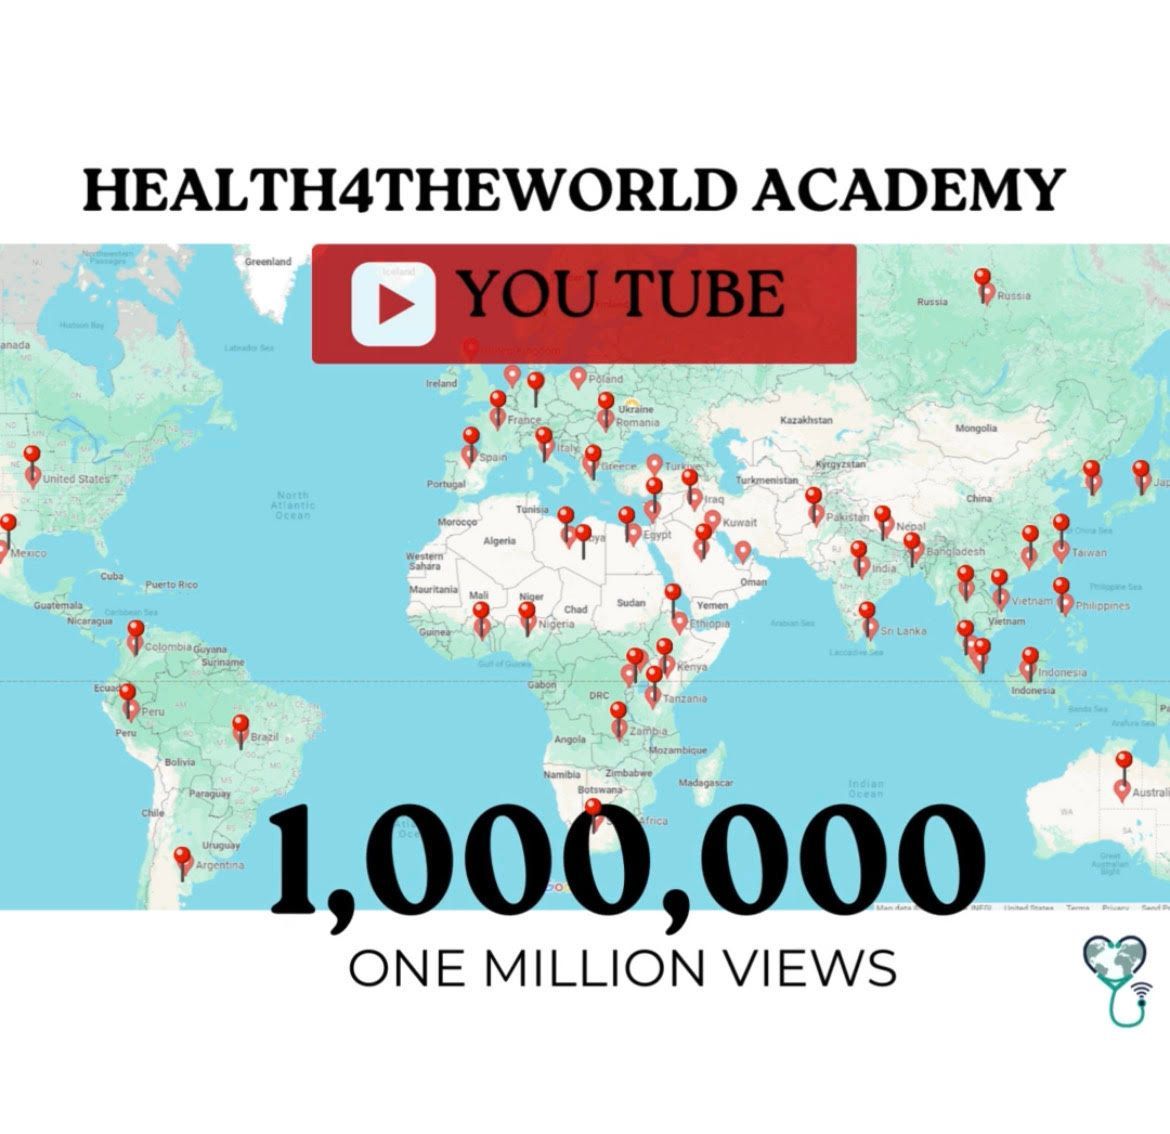 With over 1 million total views, our free YouTube Channel is an incredible resource for medical students, residents and doctors. View hundreds of lectures from leading healthcare professionals below! buff.ly/3JPE6vH